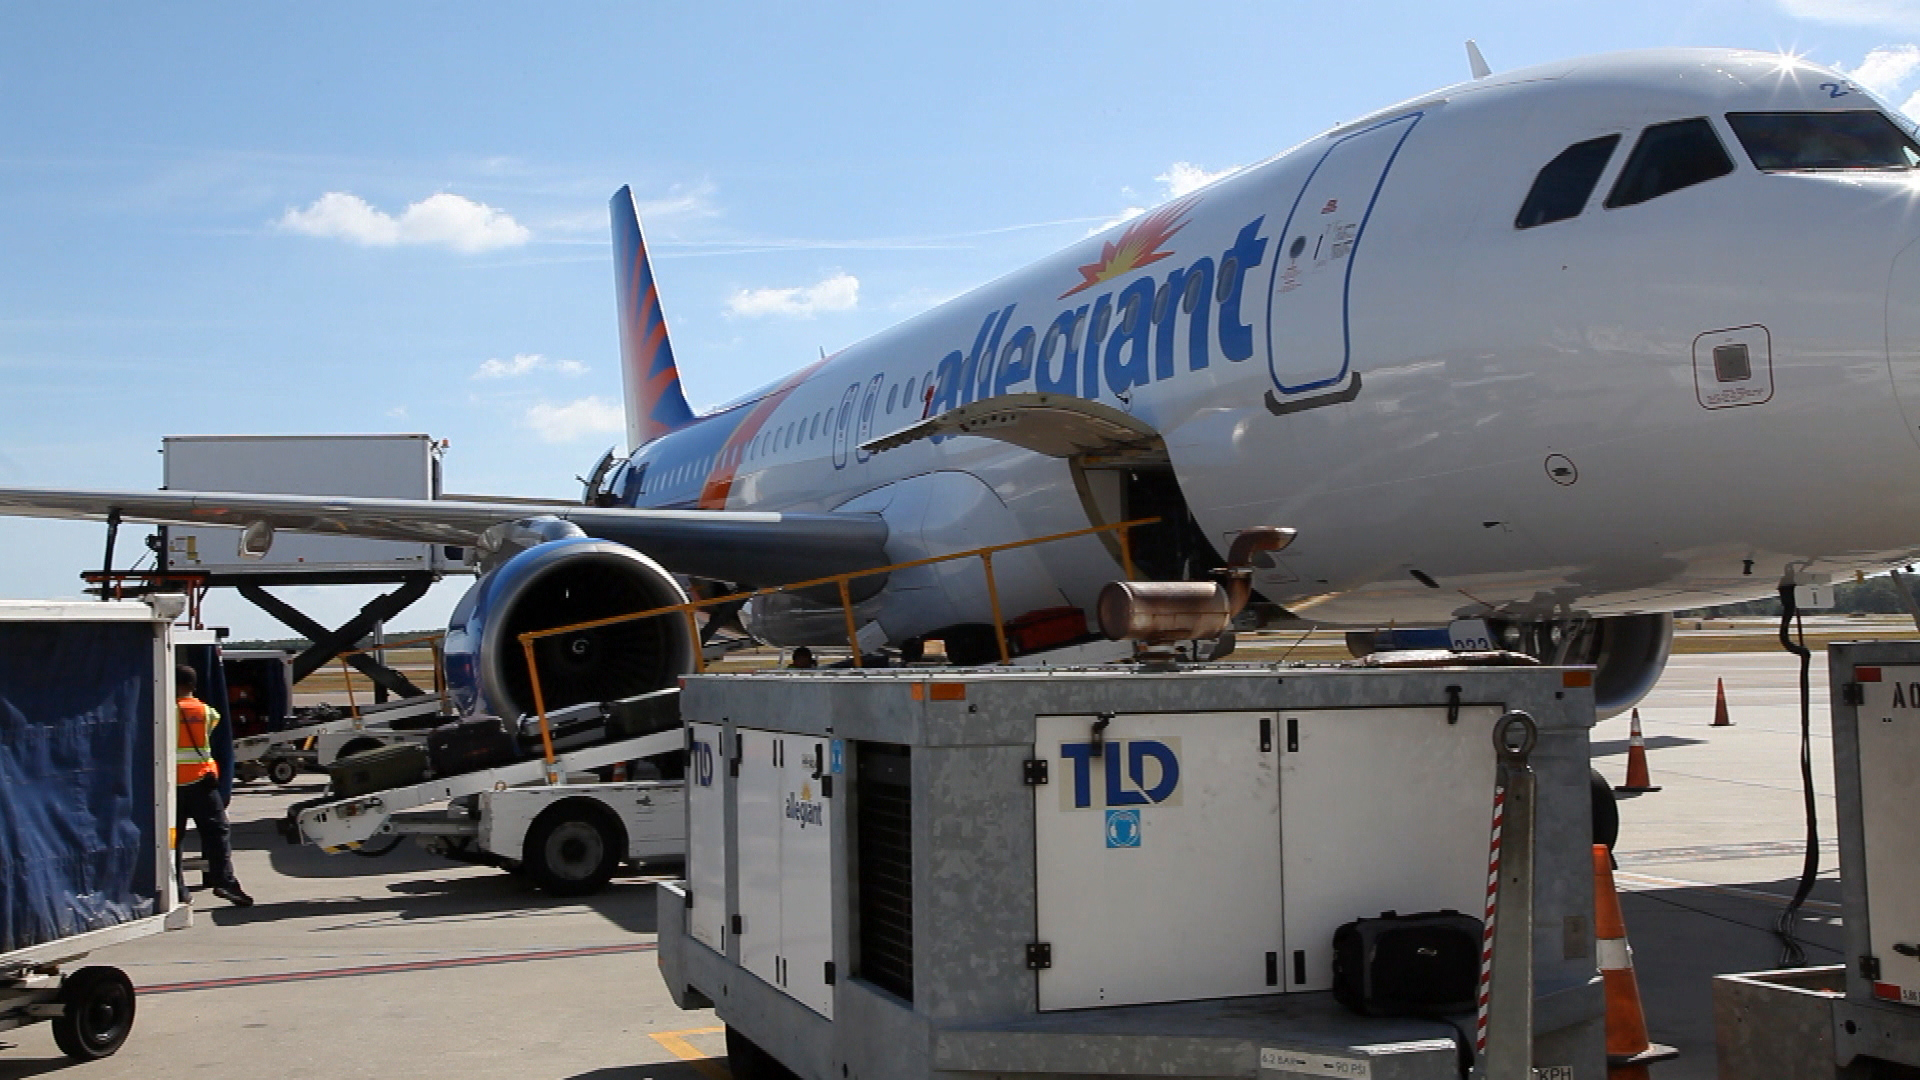 What is Wrong with Allegiant's Safety?